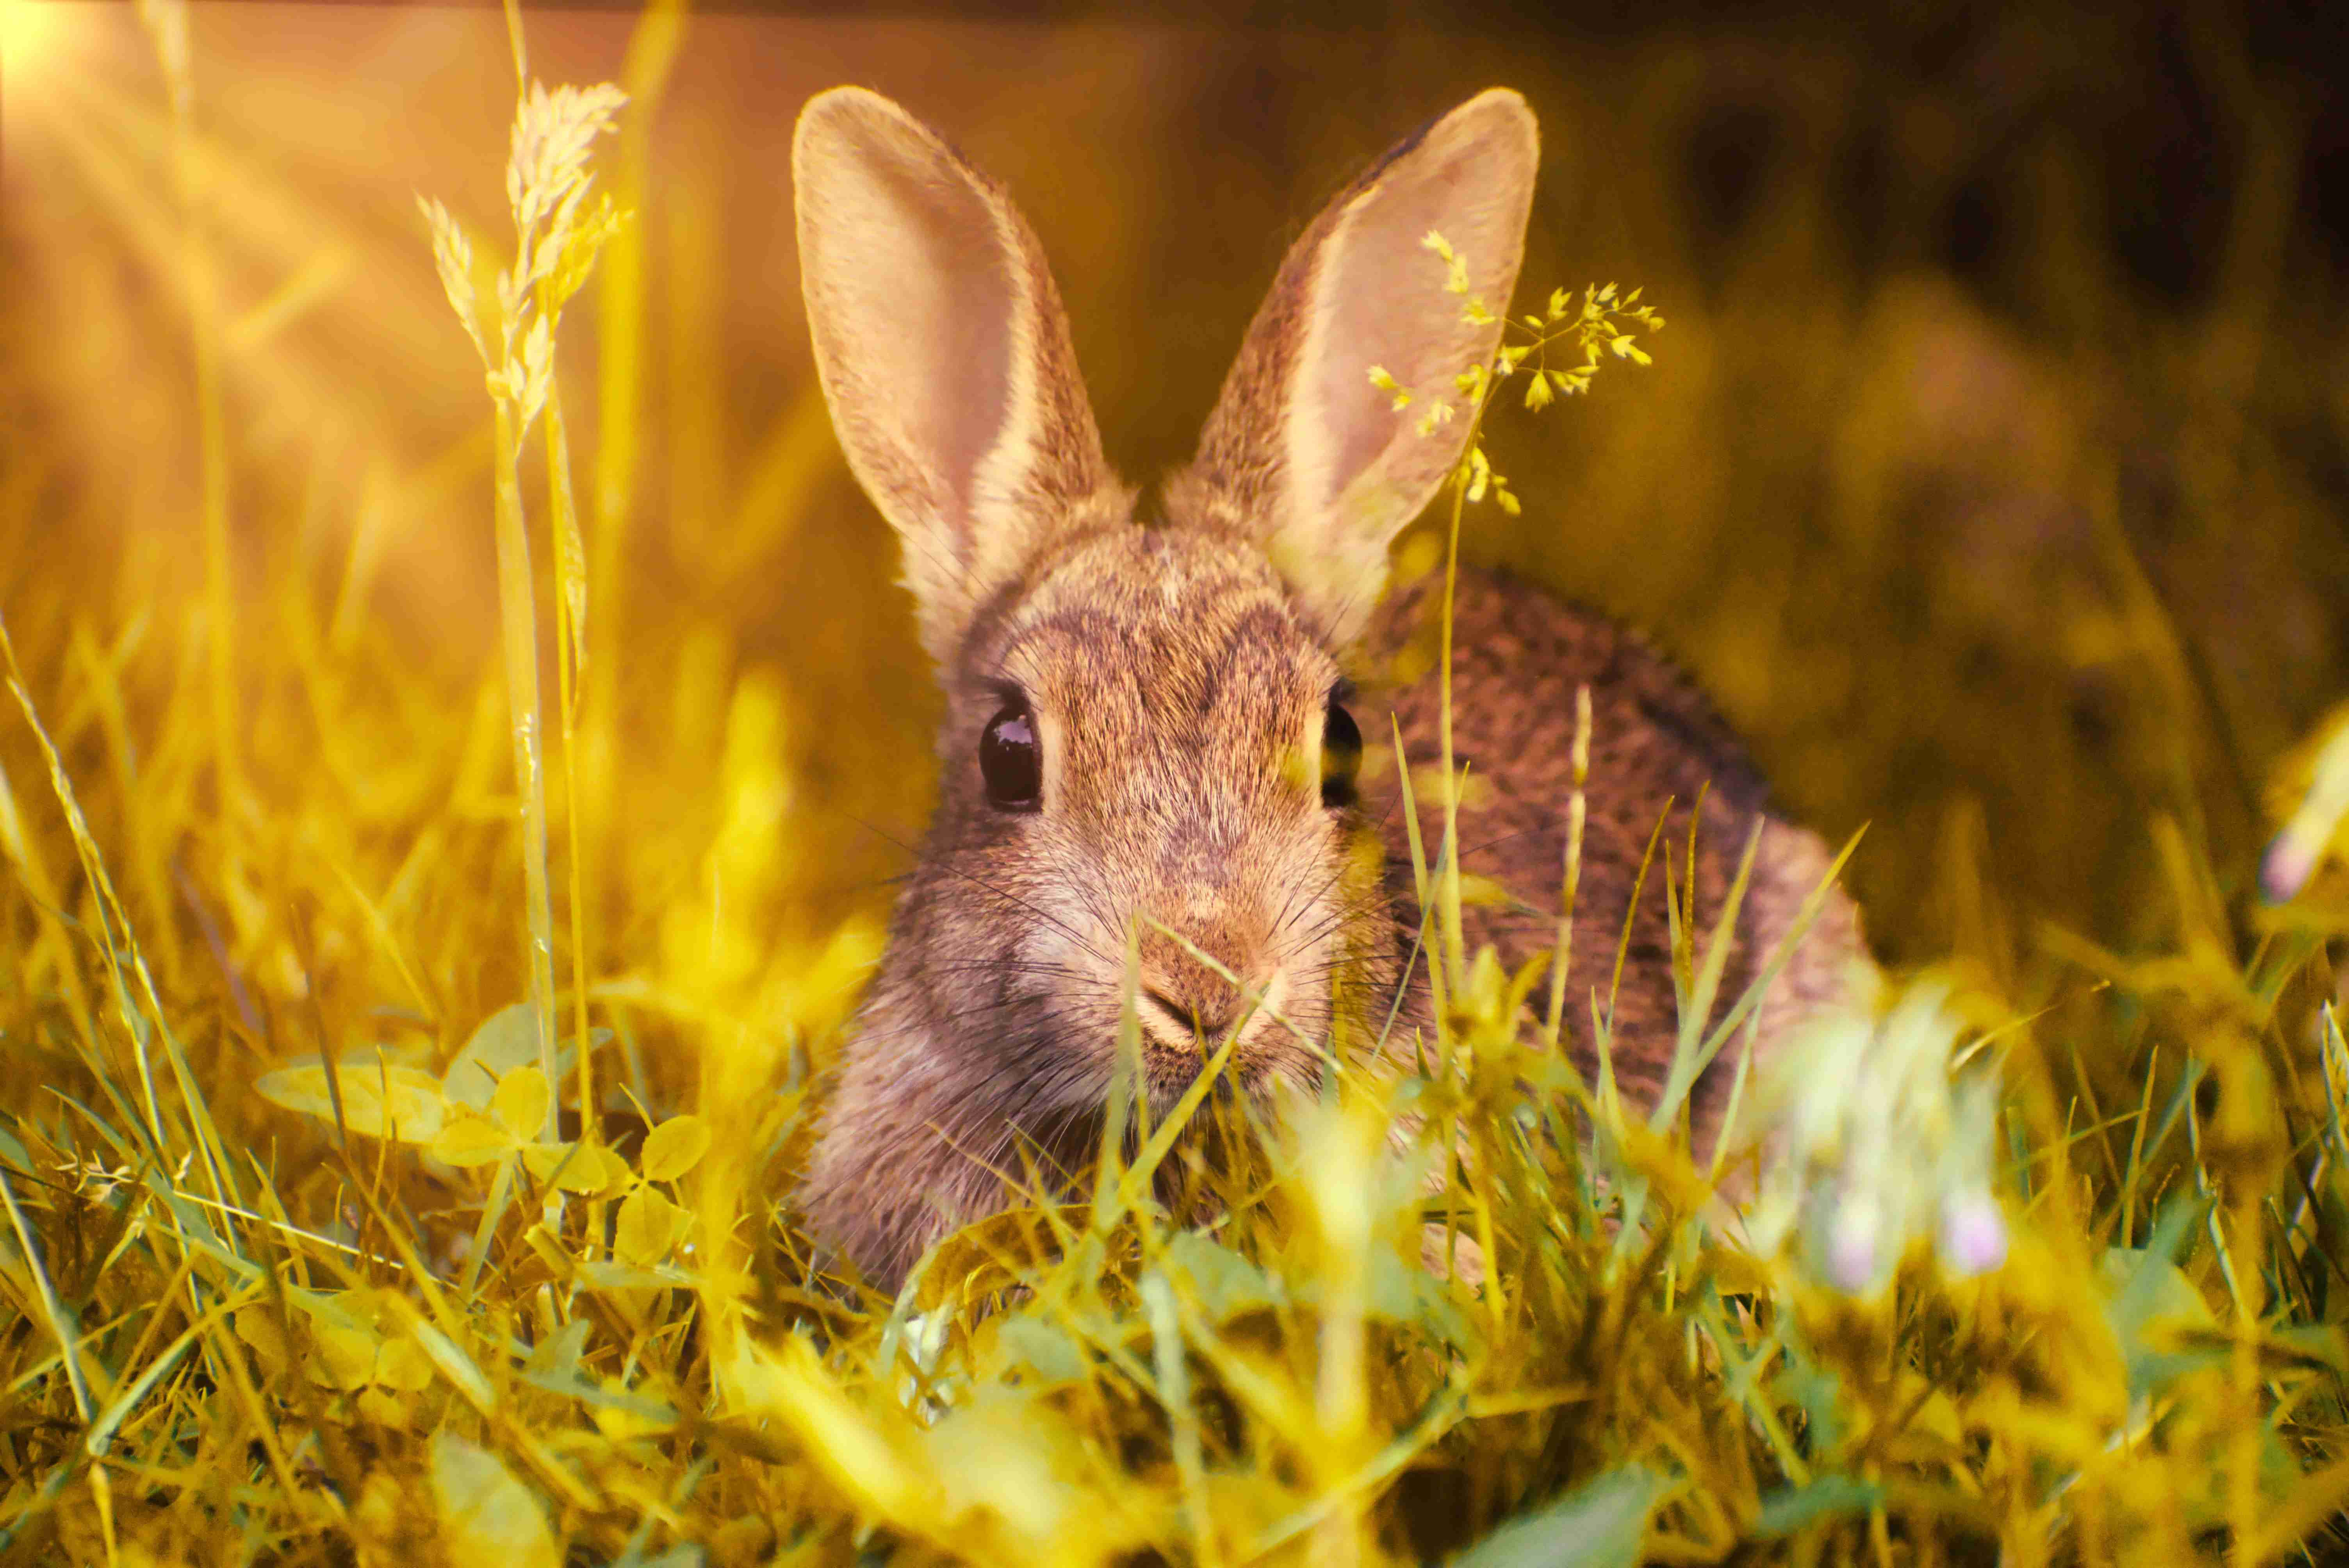 10 Common Health Issues in Rabbits: Symptoms, Causes, and Treatments